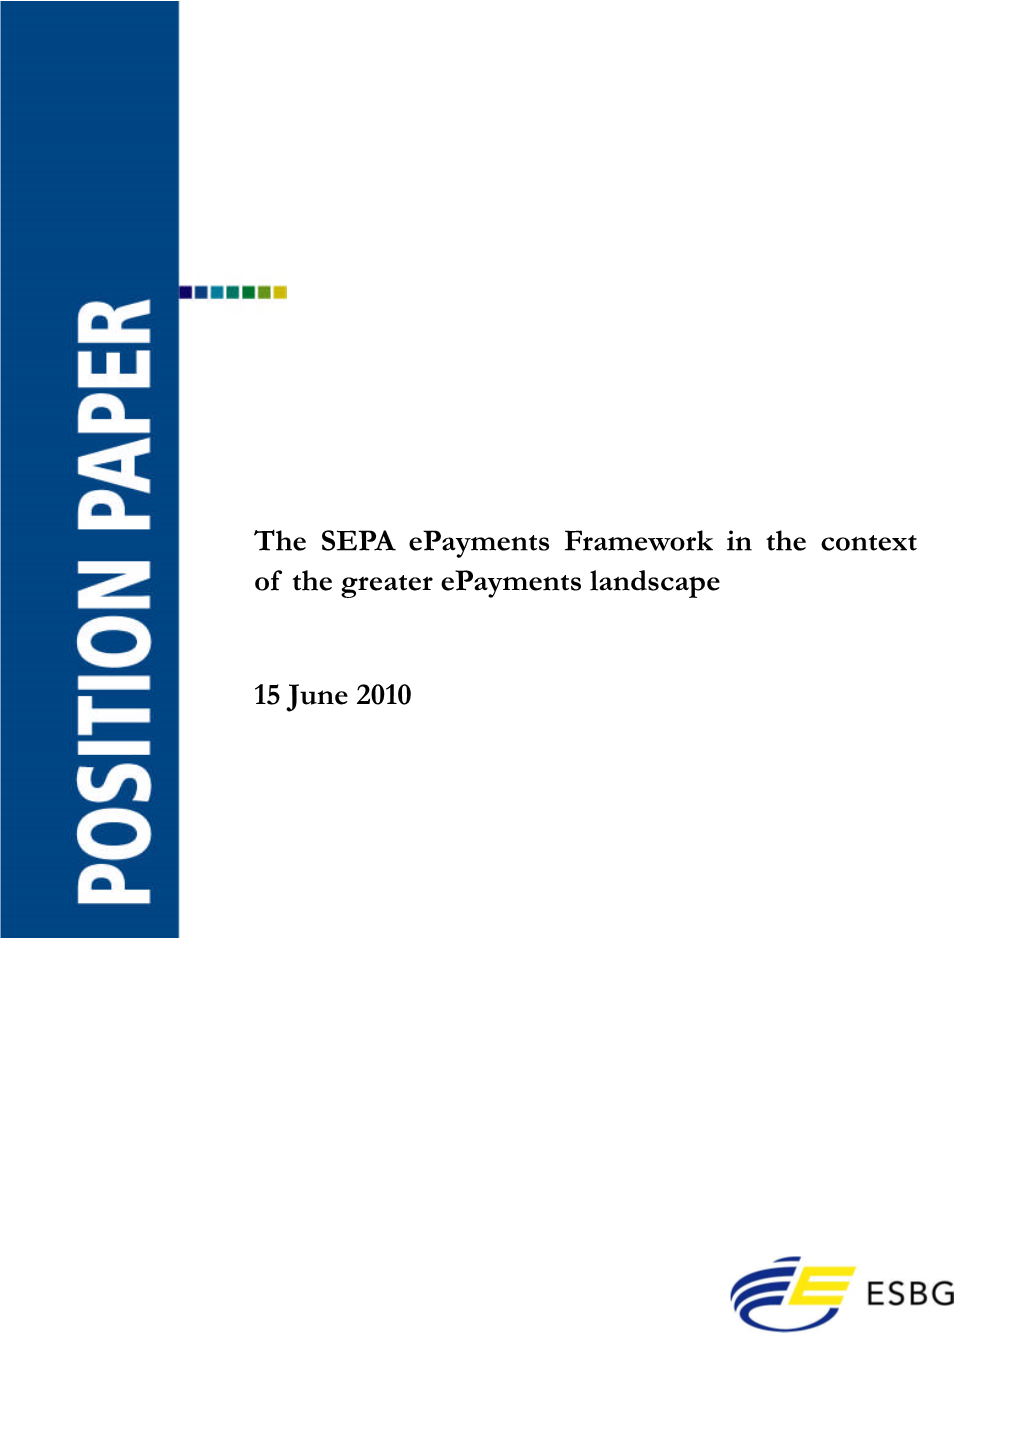 SEPA Epayments Framework in the Context of the Greater Epayments Landscape